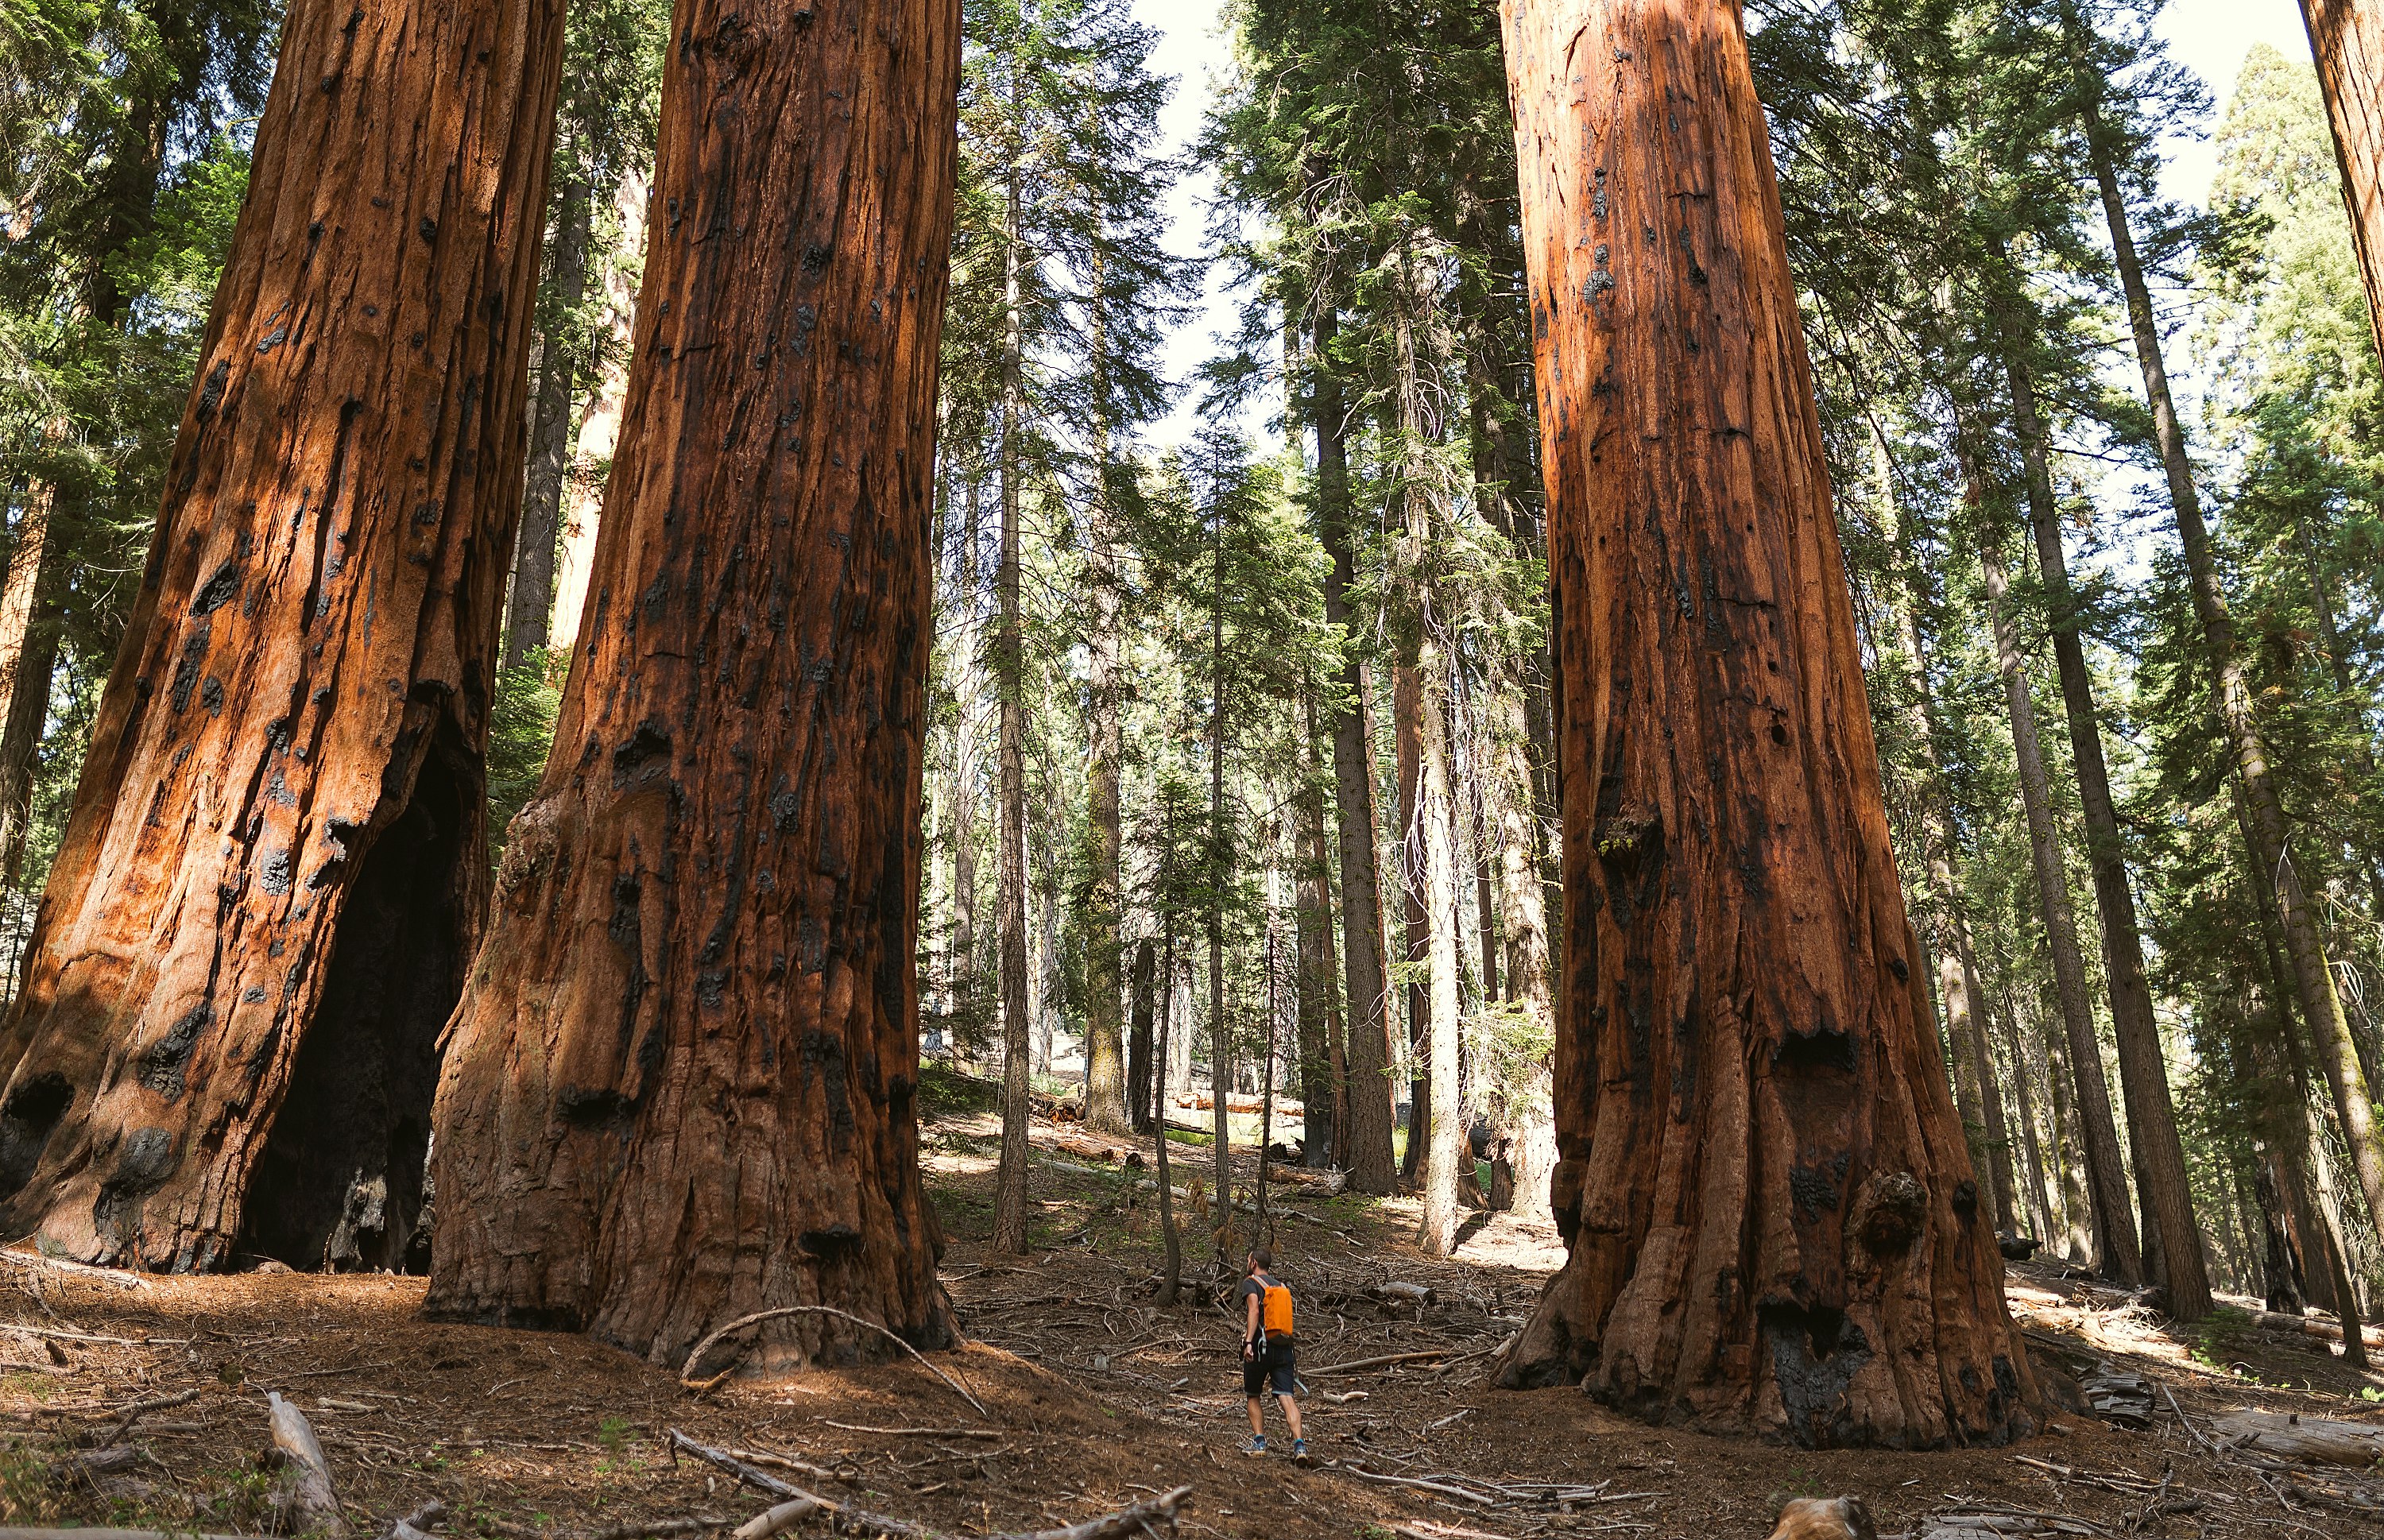 Giant Sequoia trees in Sequoia National Park